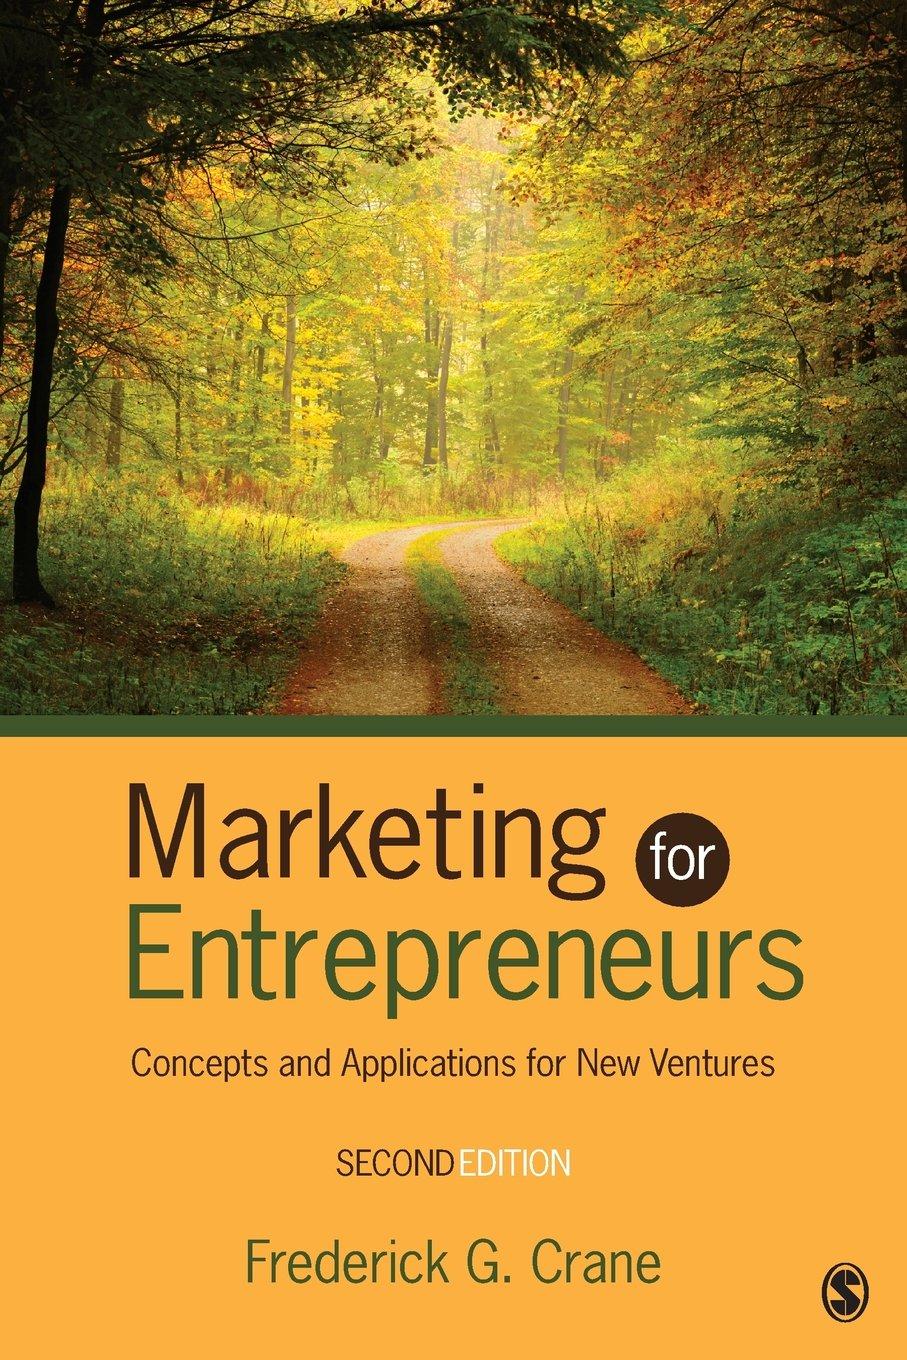 marketing for entrepreneurs concepts and applications for new ventures 2nd edition frederick g. crane